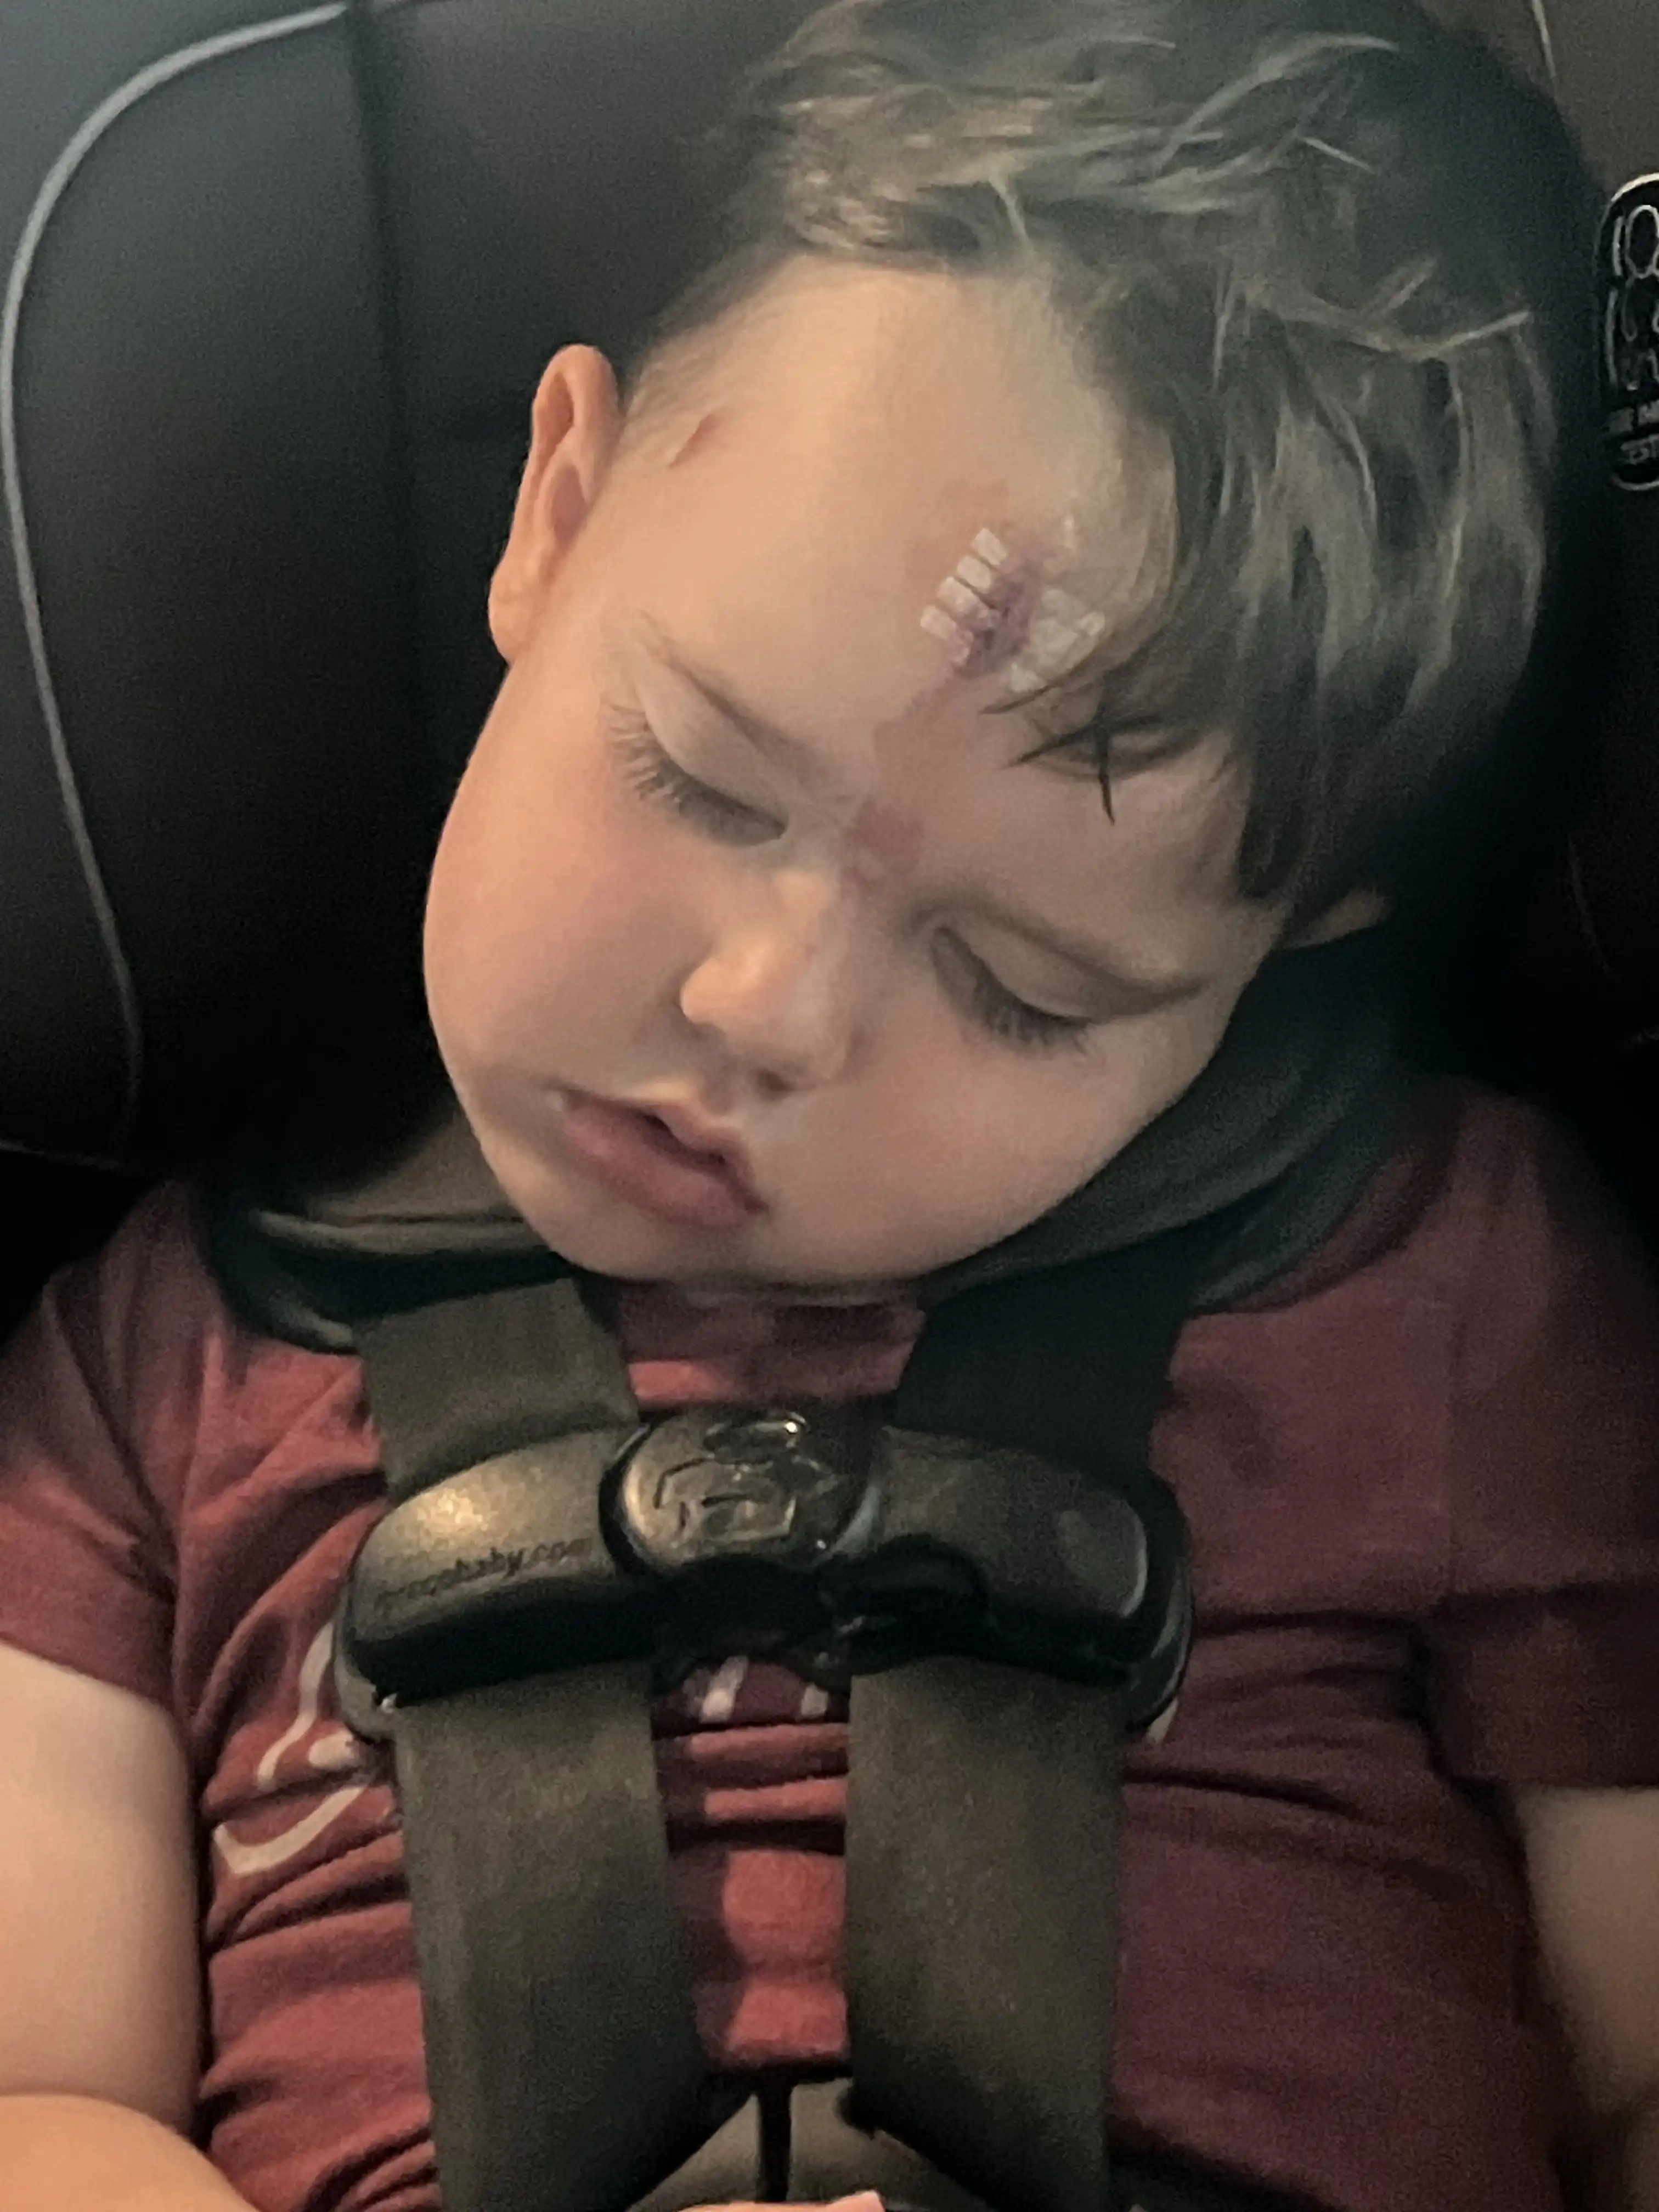 Royal asleep in his carseat with a bandage on his forehead between his eyes.